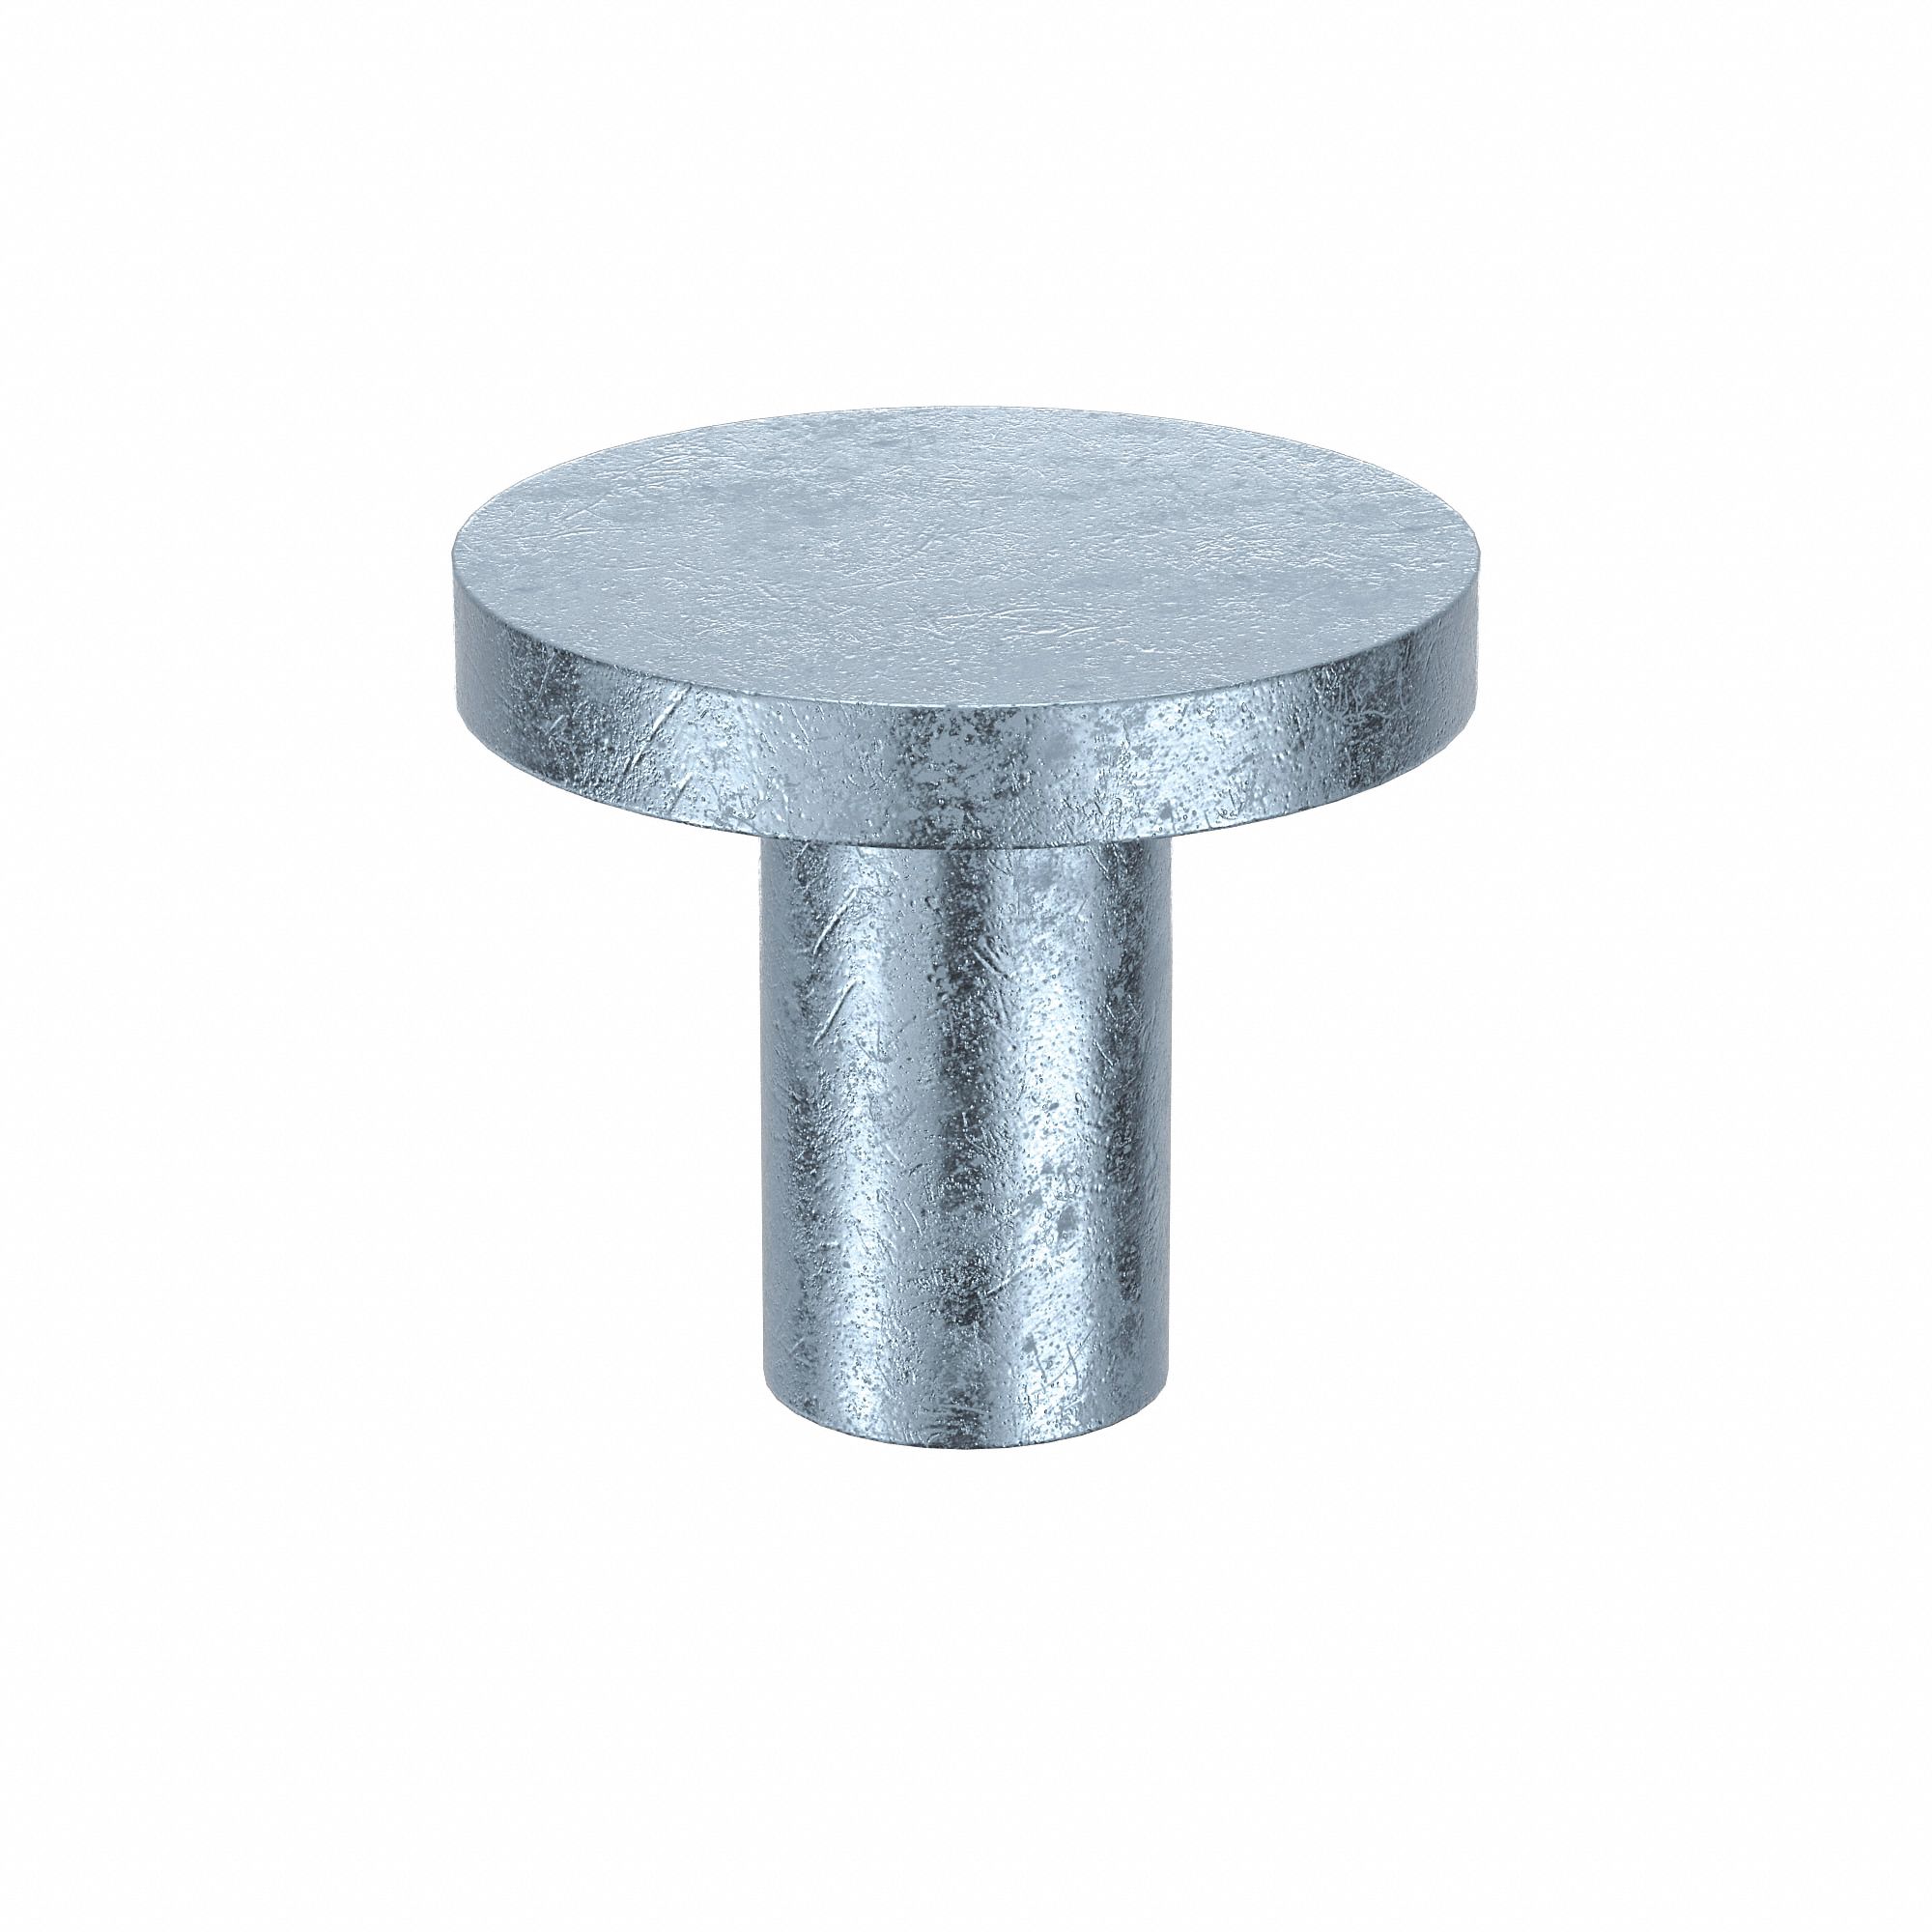 Solid Rivet: Inch, Flat, 0.088 in Shank Dia, 3/16 in Overall Lg, Steel, Low  Carbon, 2,000 PK